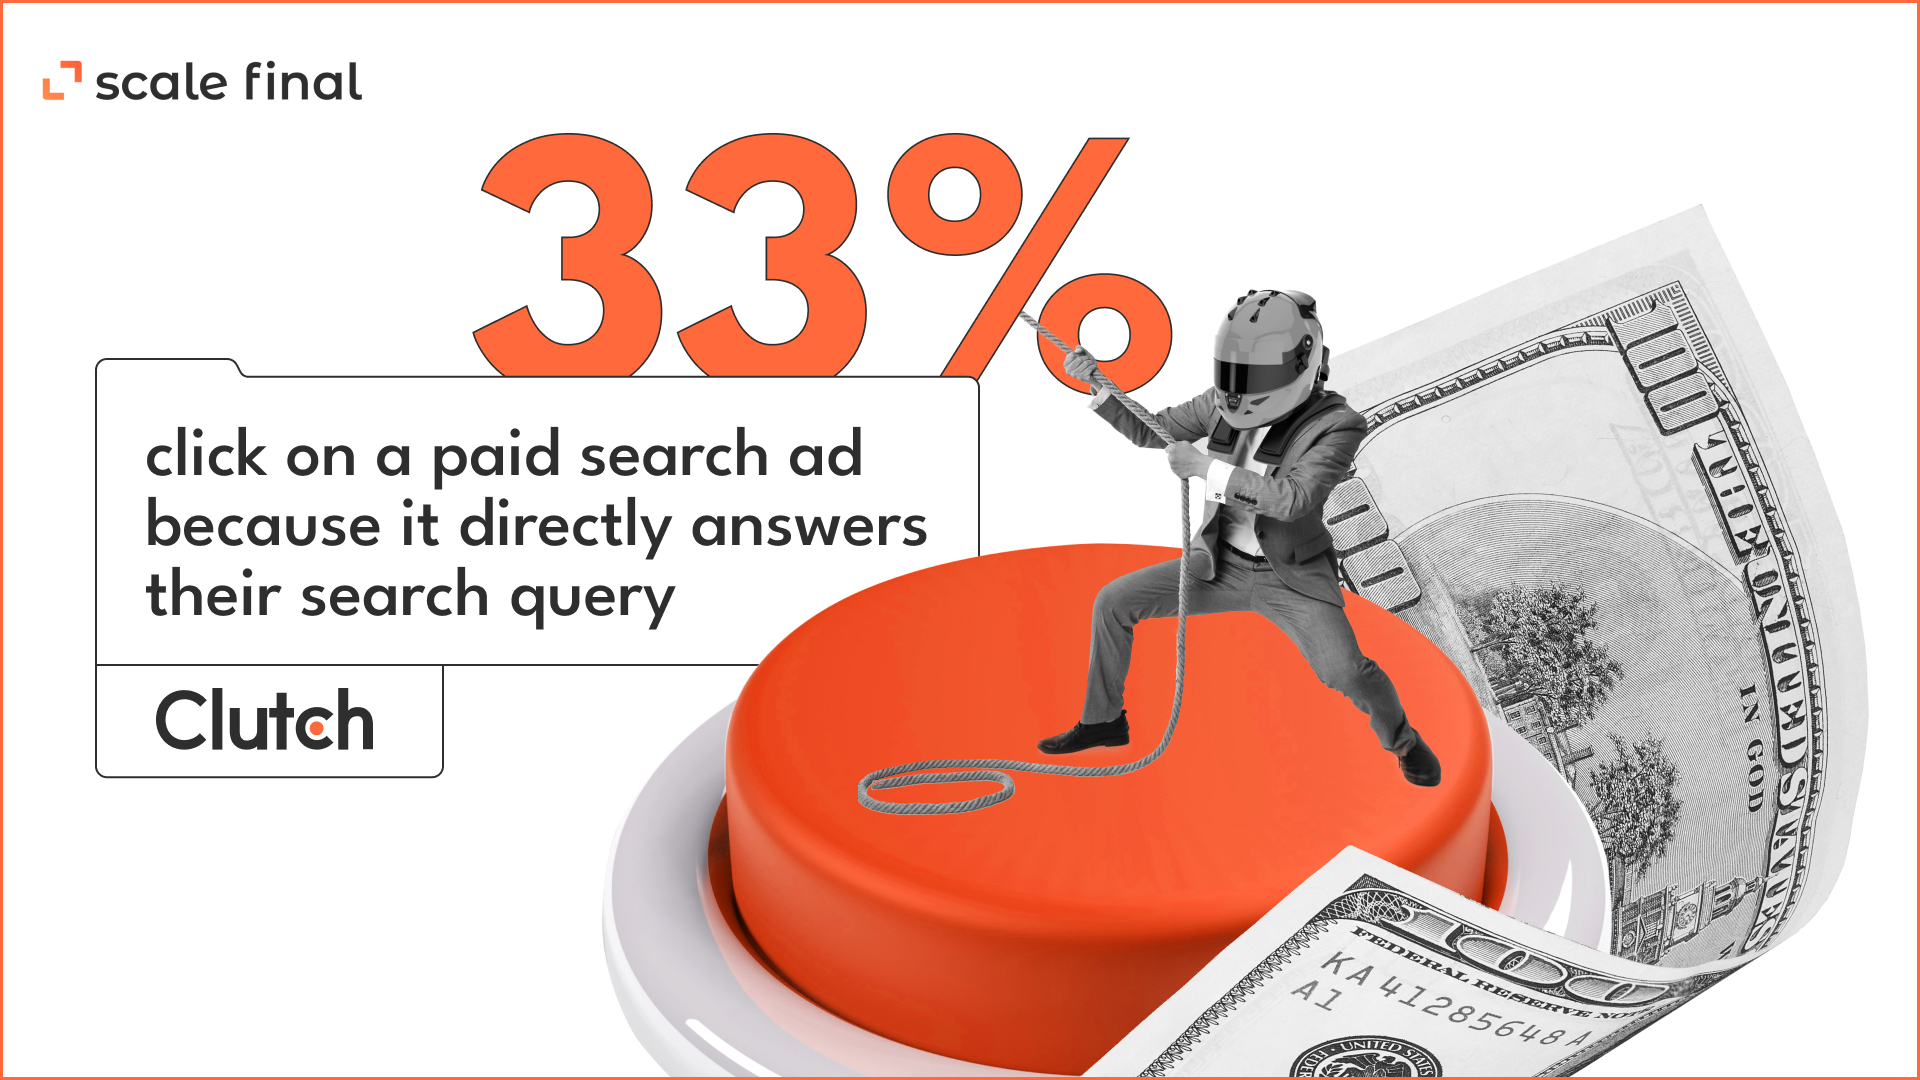 33% click on a paid search ad because it directly answers their search query.